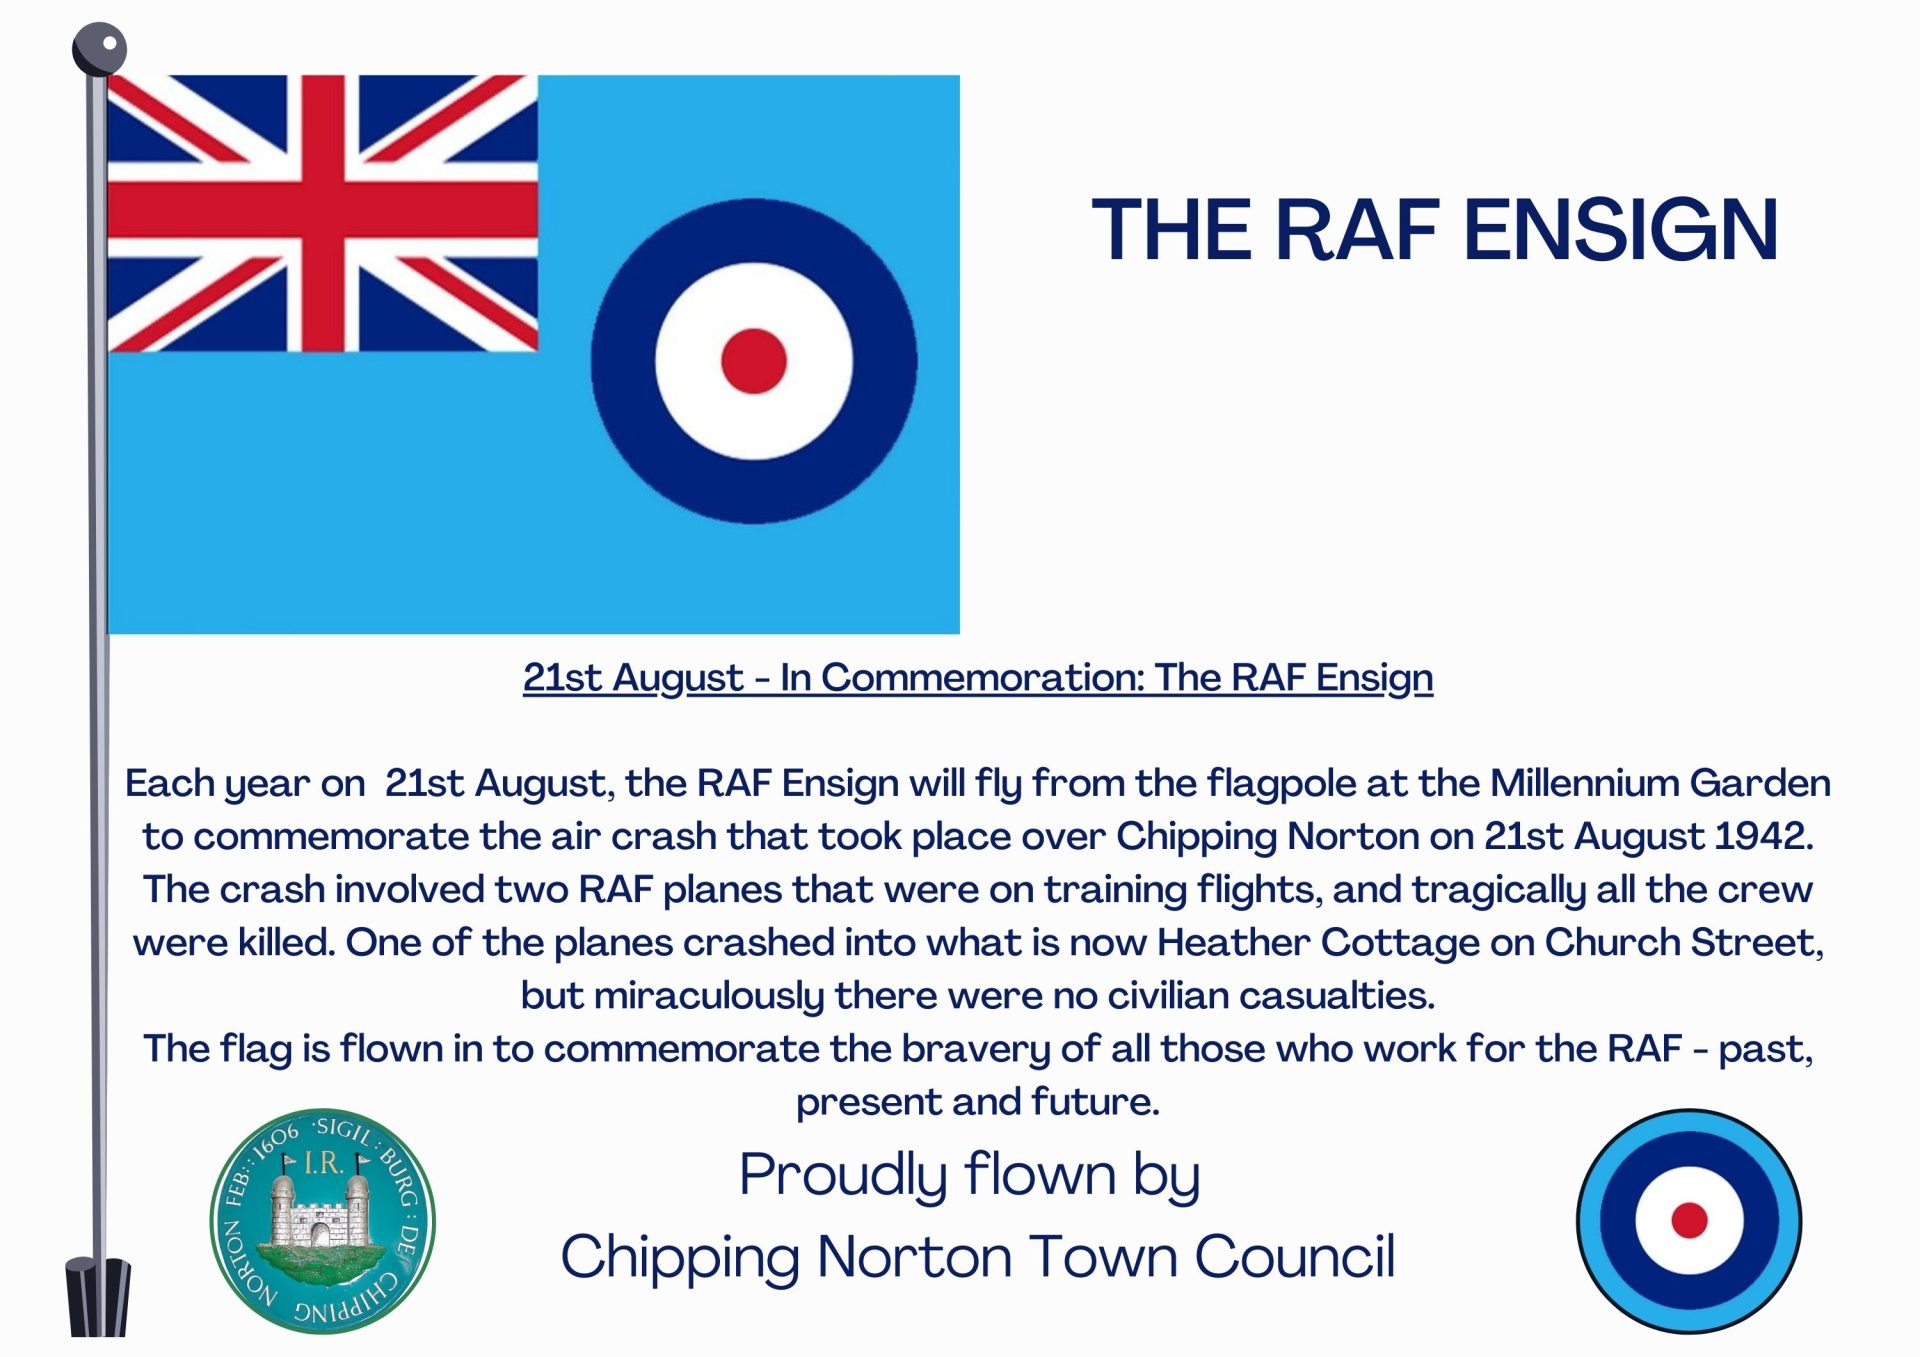 21st August - In Commemoration: The RAF Ensign

Each year on  21st August, the RAF Ensign will fly from the flagpole at the Millennium Garden to commemorate the air crash that took place over Chipping Norton on 21st August 1942. The crash involved two RAF planes that were on training flights, and tragically all the crew were killed. One of the planes crashed into what is now Heather Cottage on Church Street, but miraculously there were no civilian casualties.
The flag is flown in to commemorate the bravery of all those who work for the RAF - past, present and future.